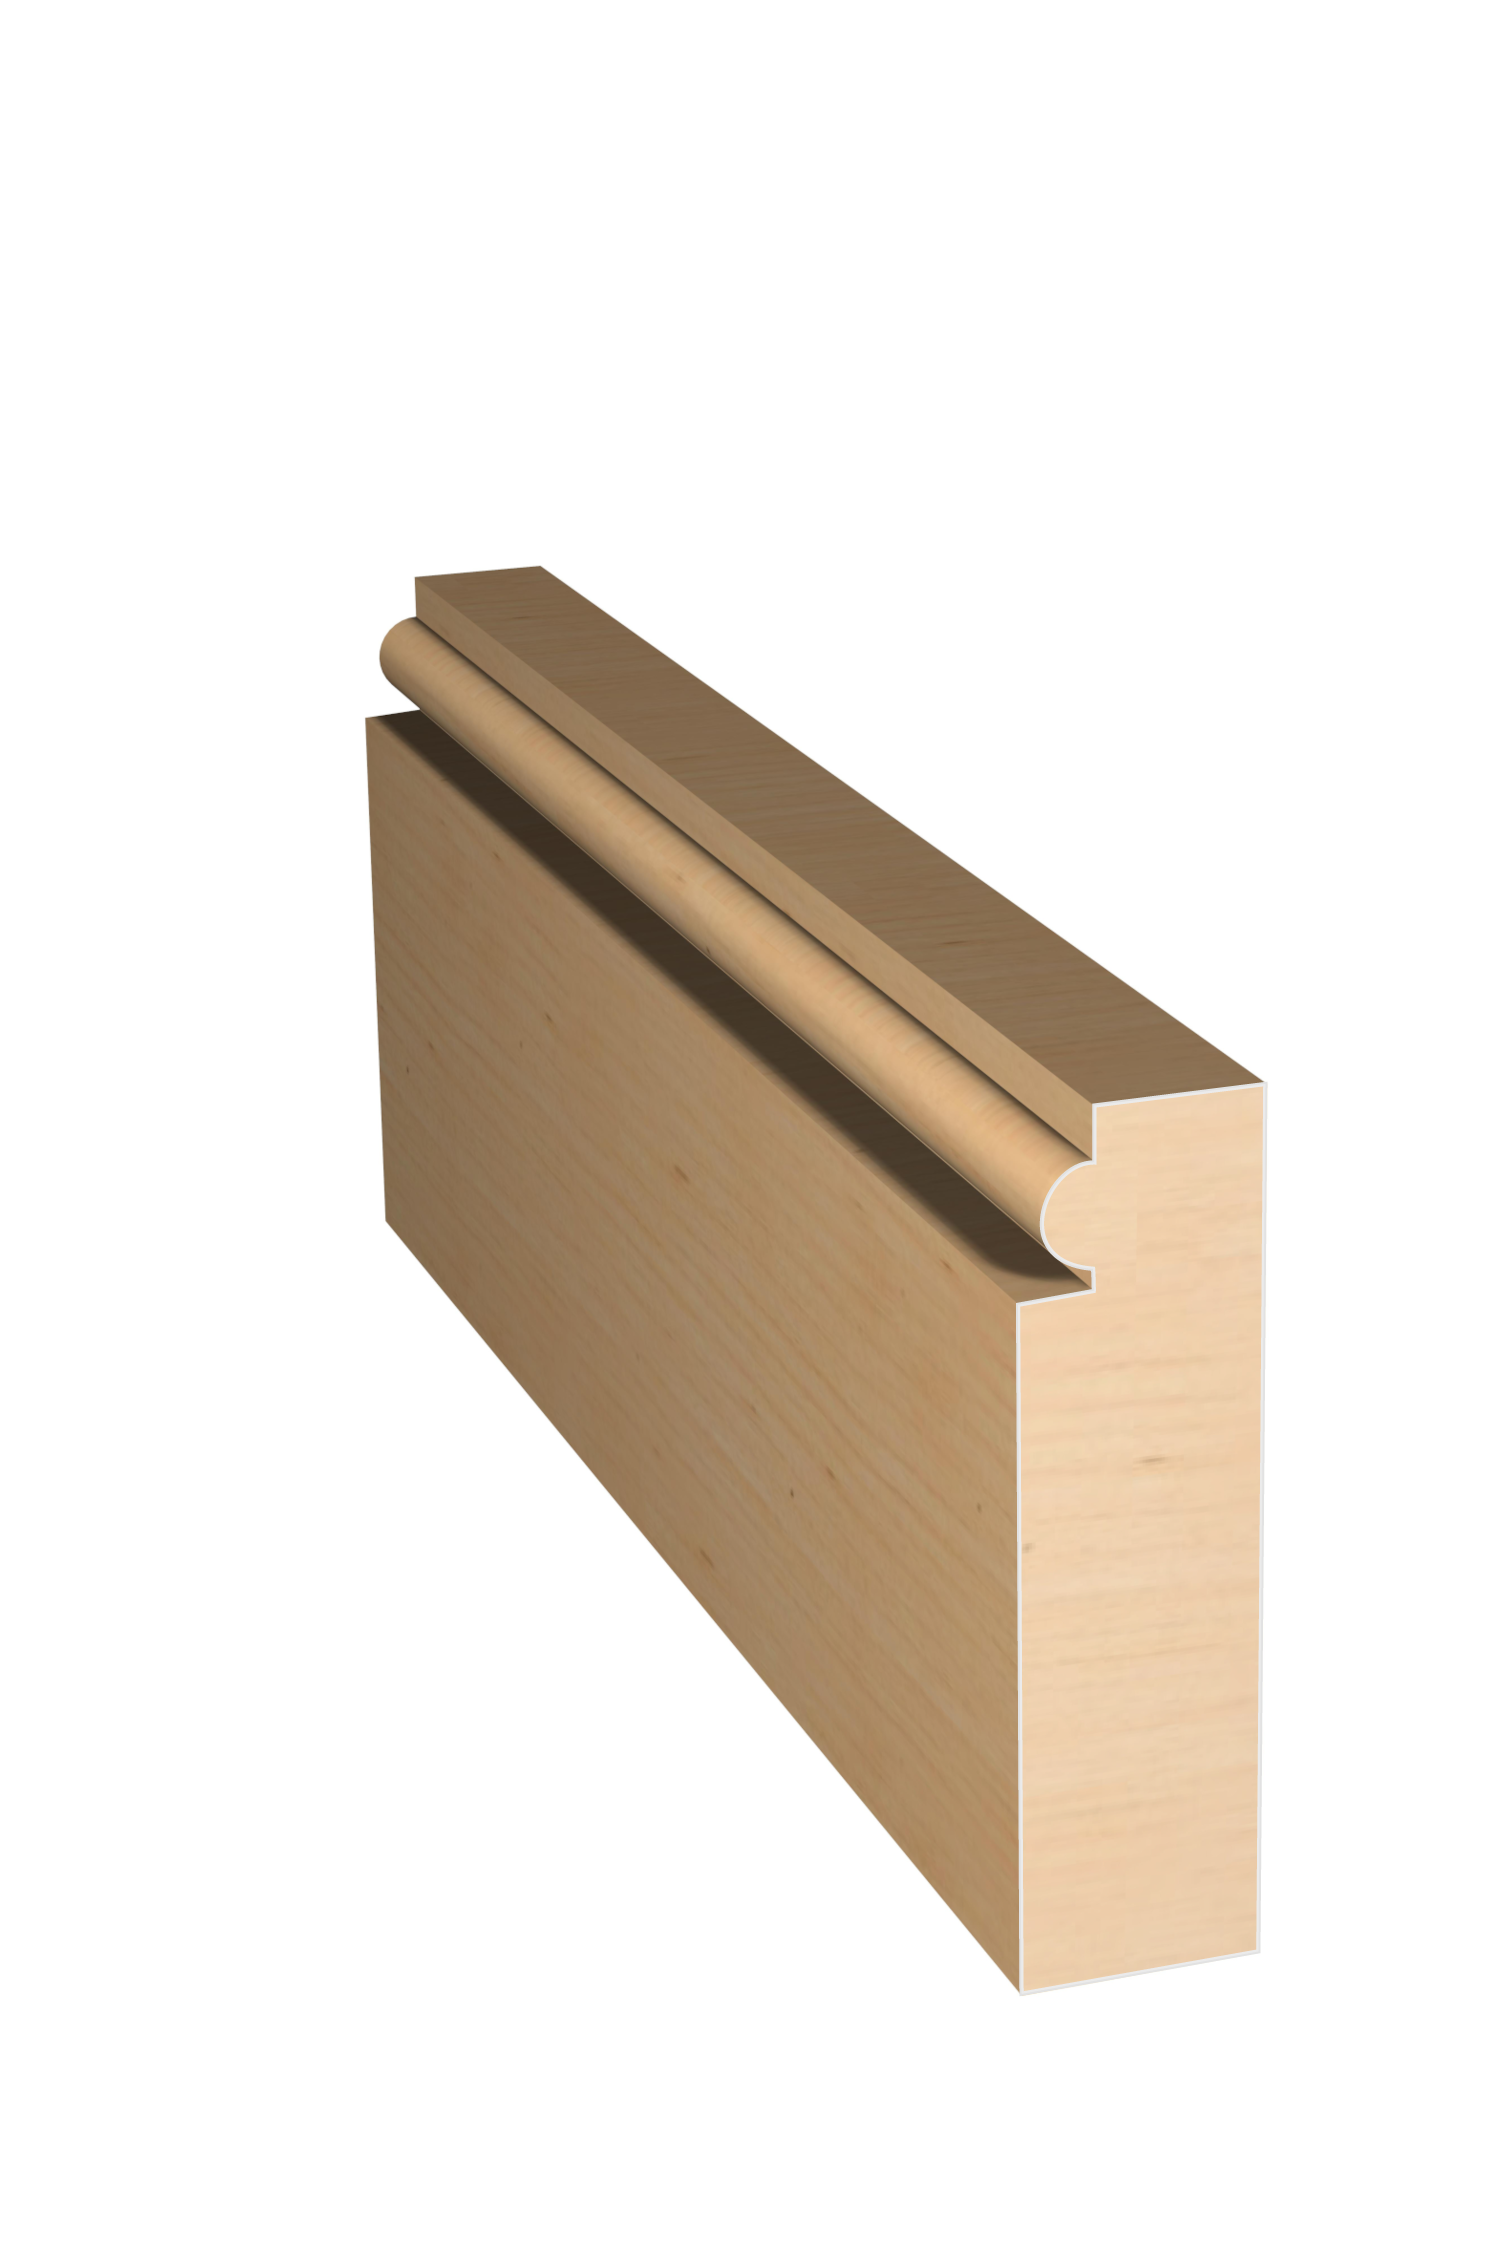 Three dimensional rendering of custom casing wood molding CAPL21427 made by Public Lumber Company in Detroit.